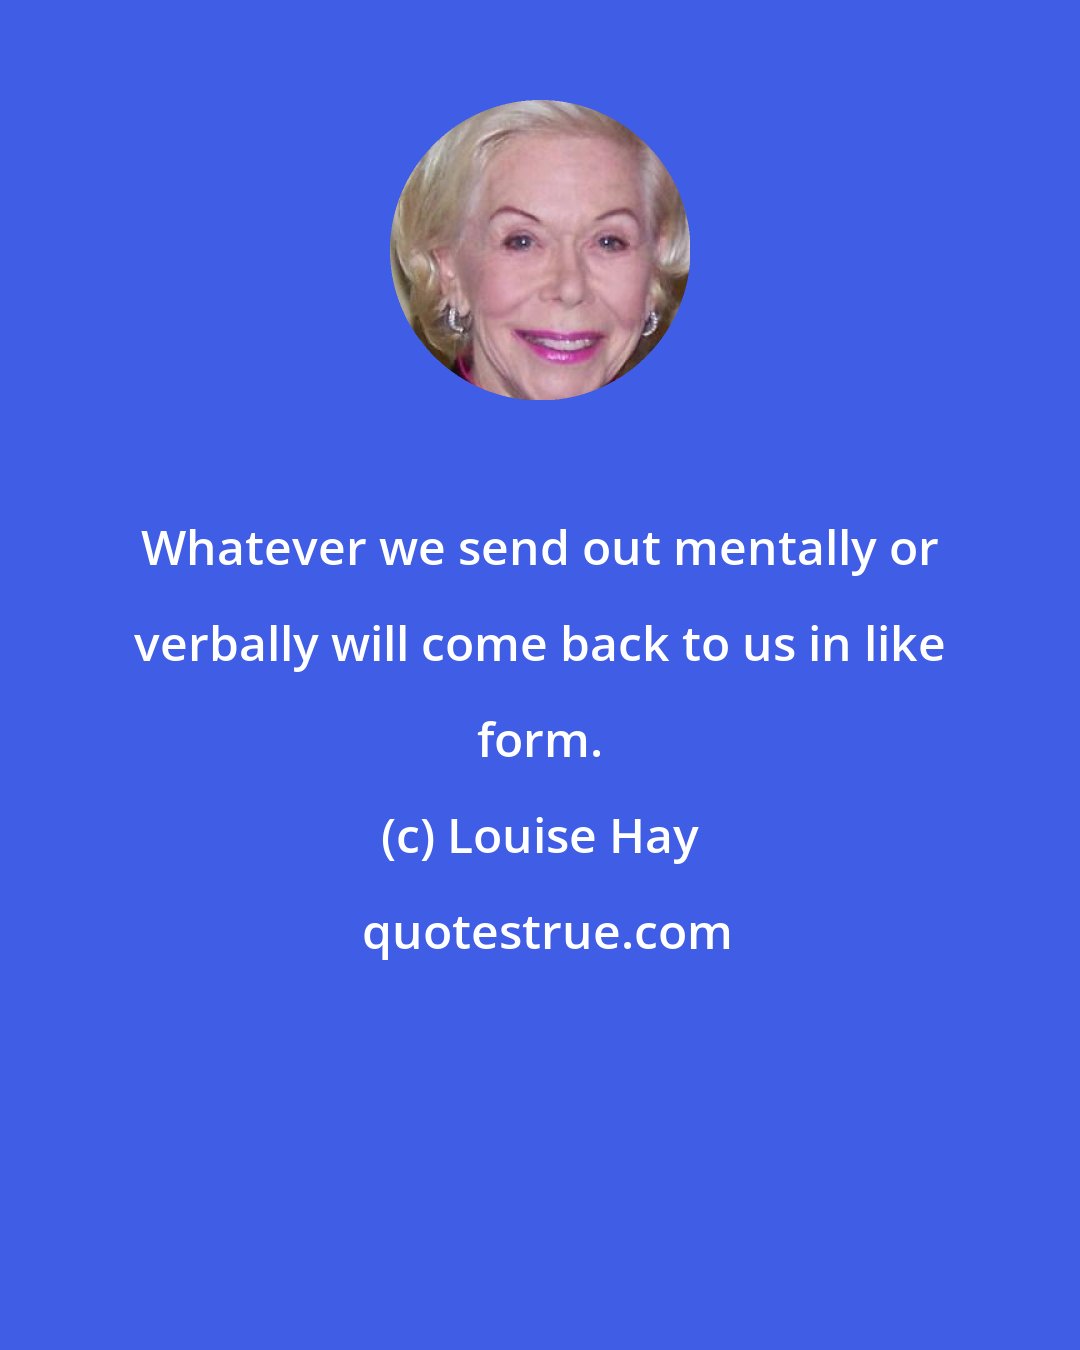 Louise Hay: Whatever we send out mentally or verbally will come back to us in like form.